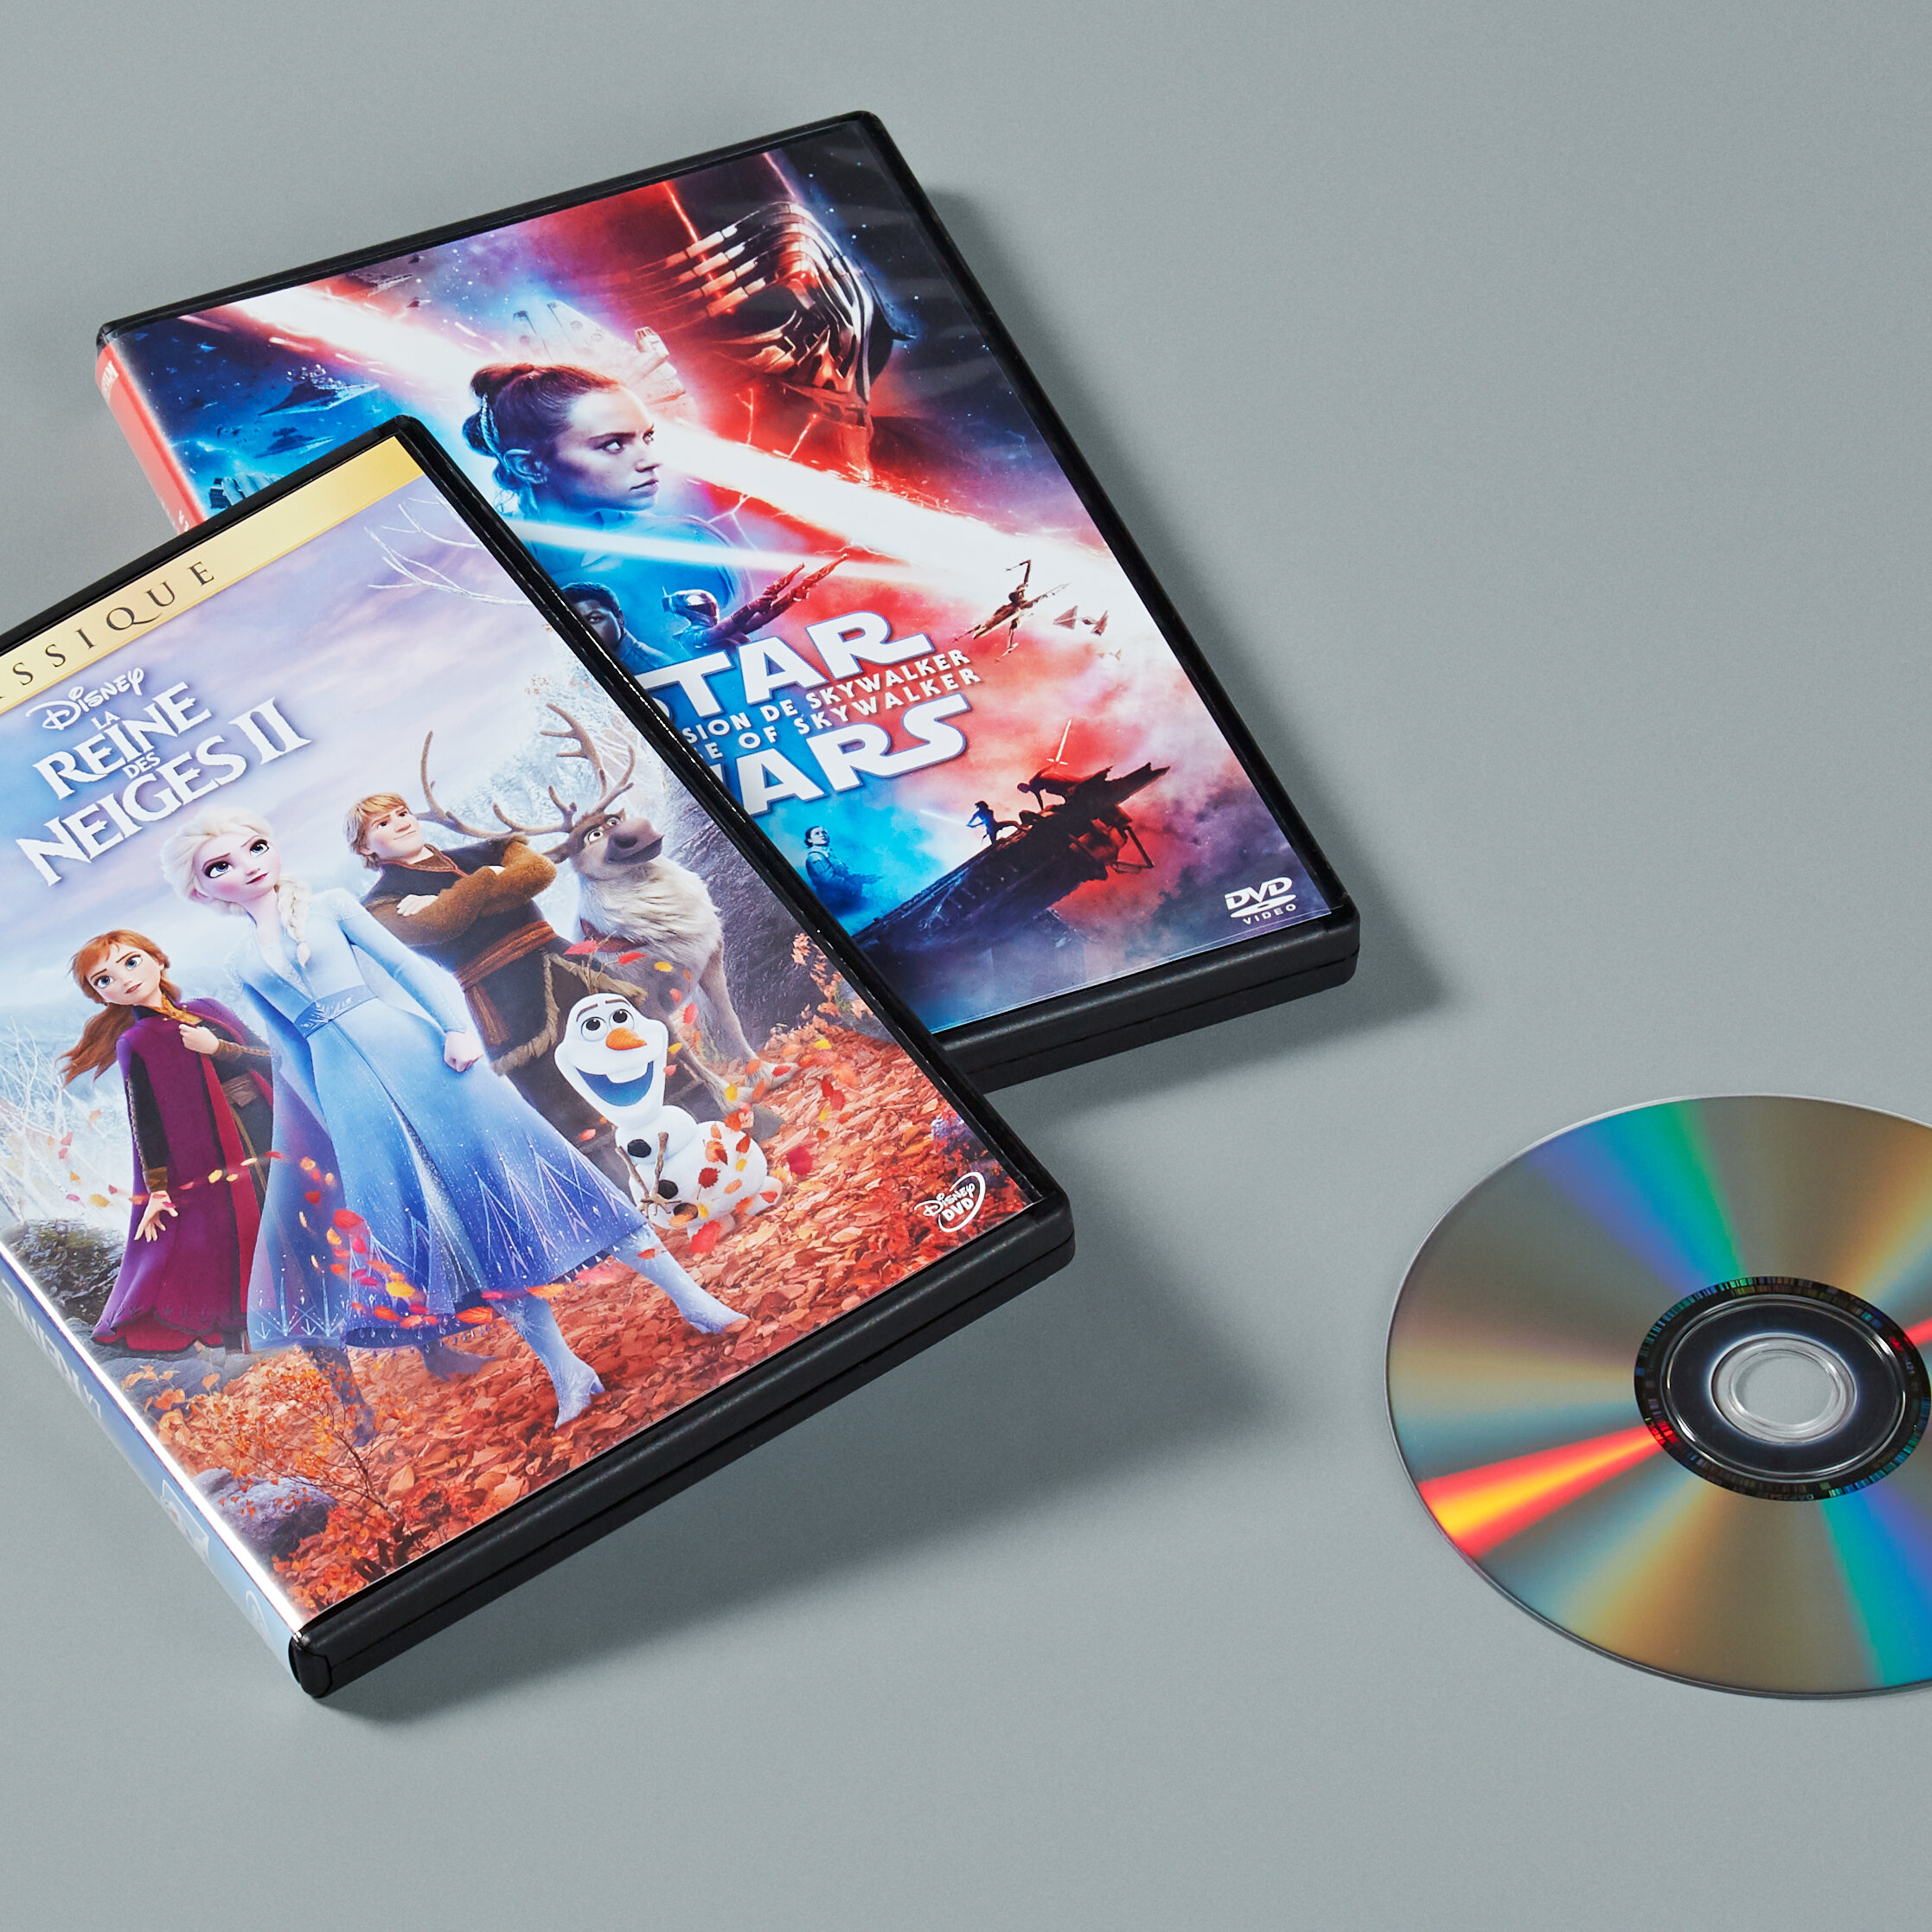 DVD and Music DVD and Blue-Rays.jpg